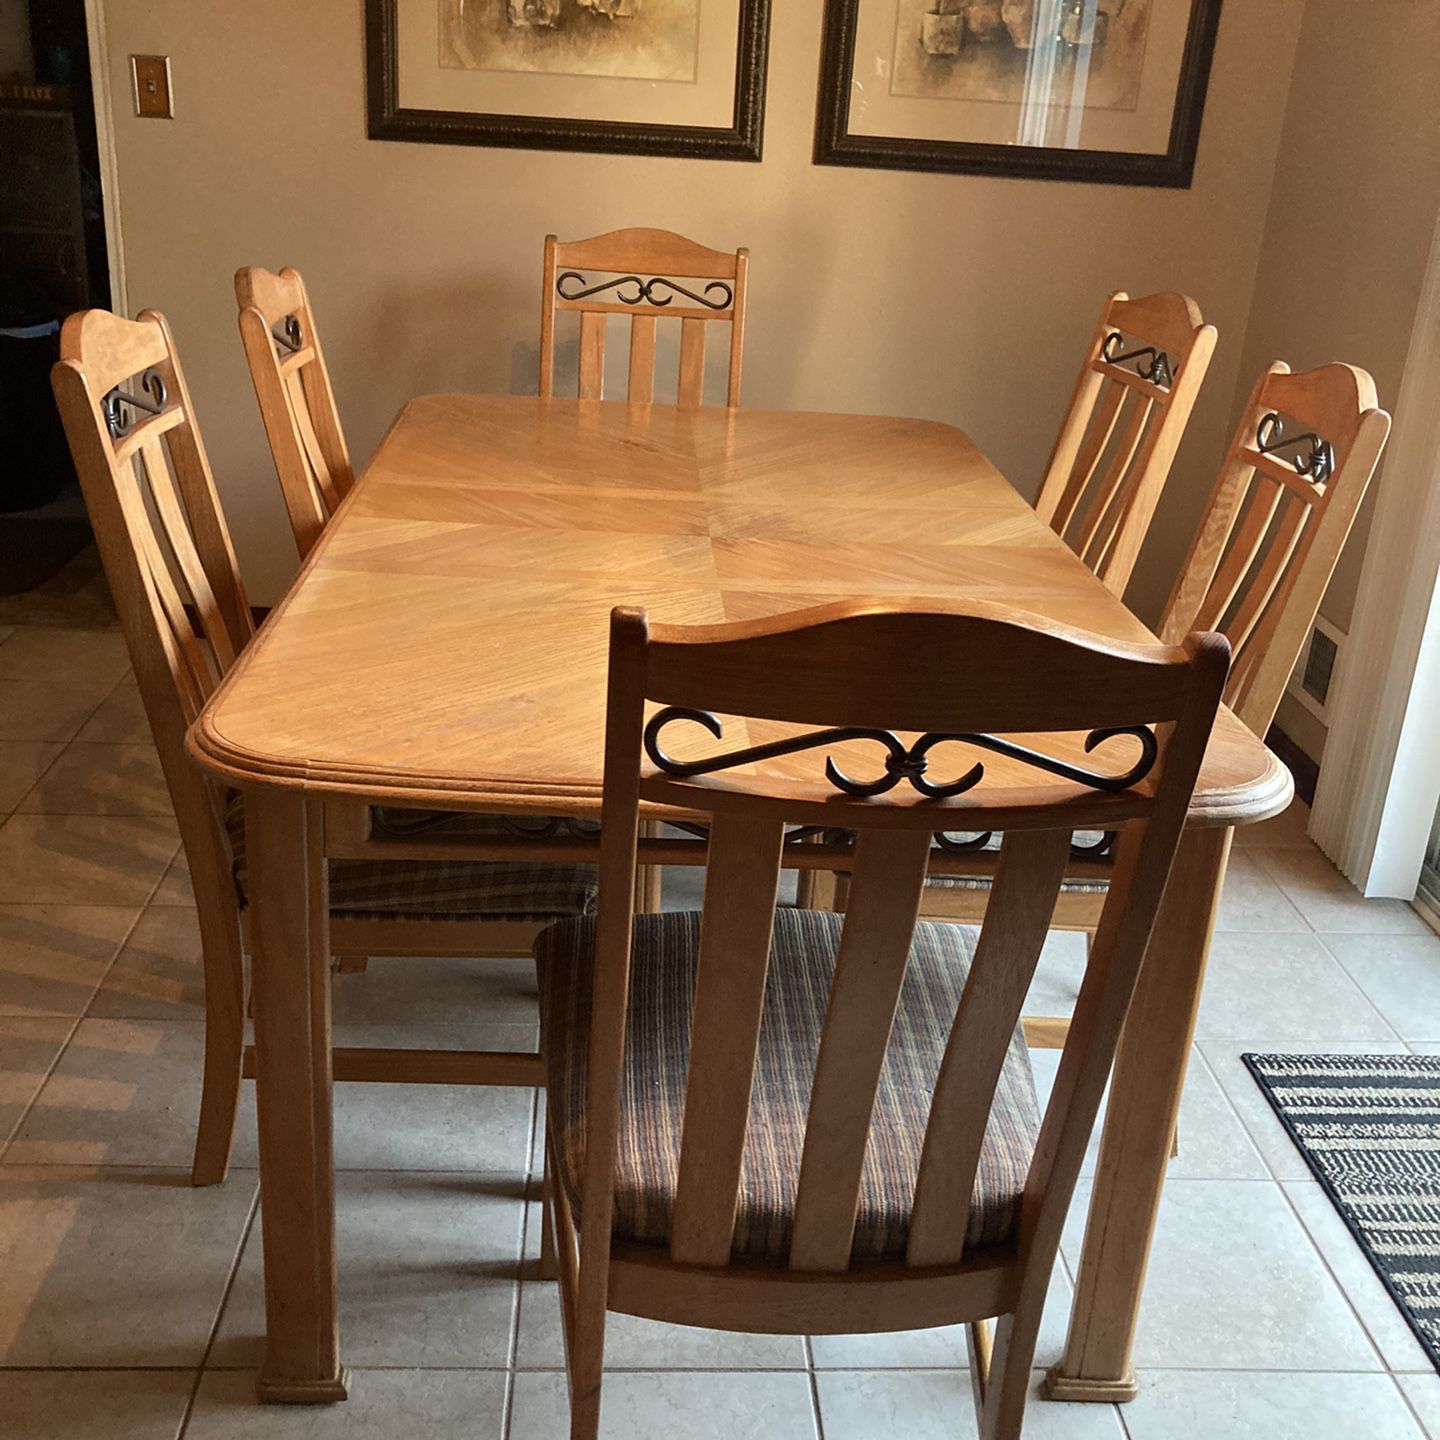 FREE Kitchen Table W/6 Upholstered chairs and Bakers Rack